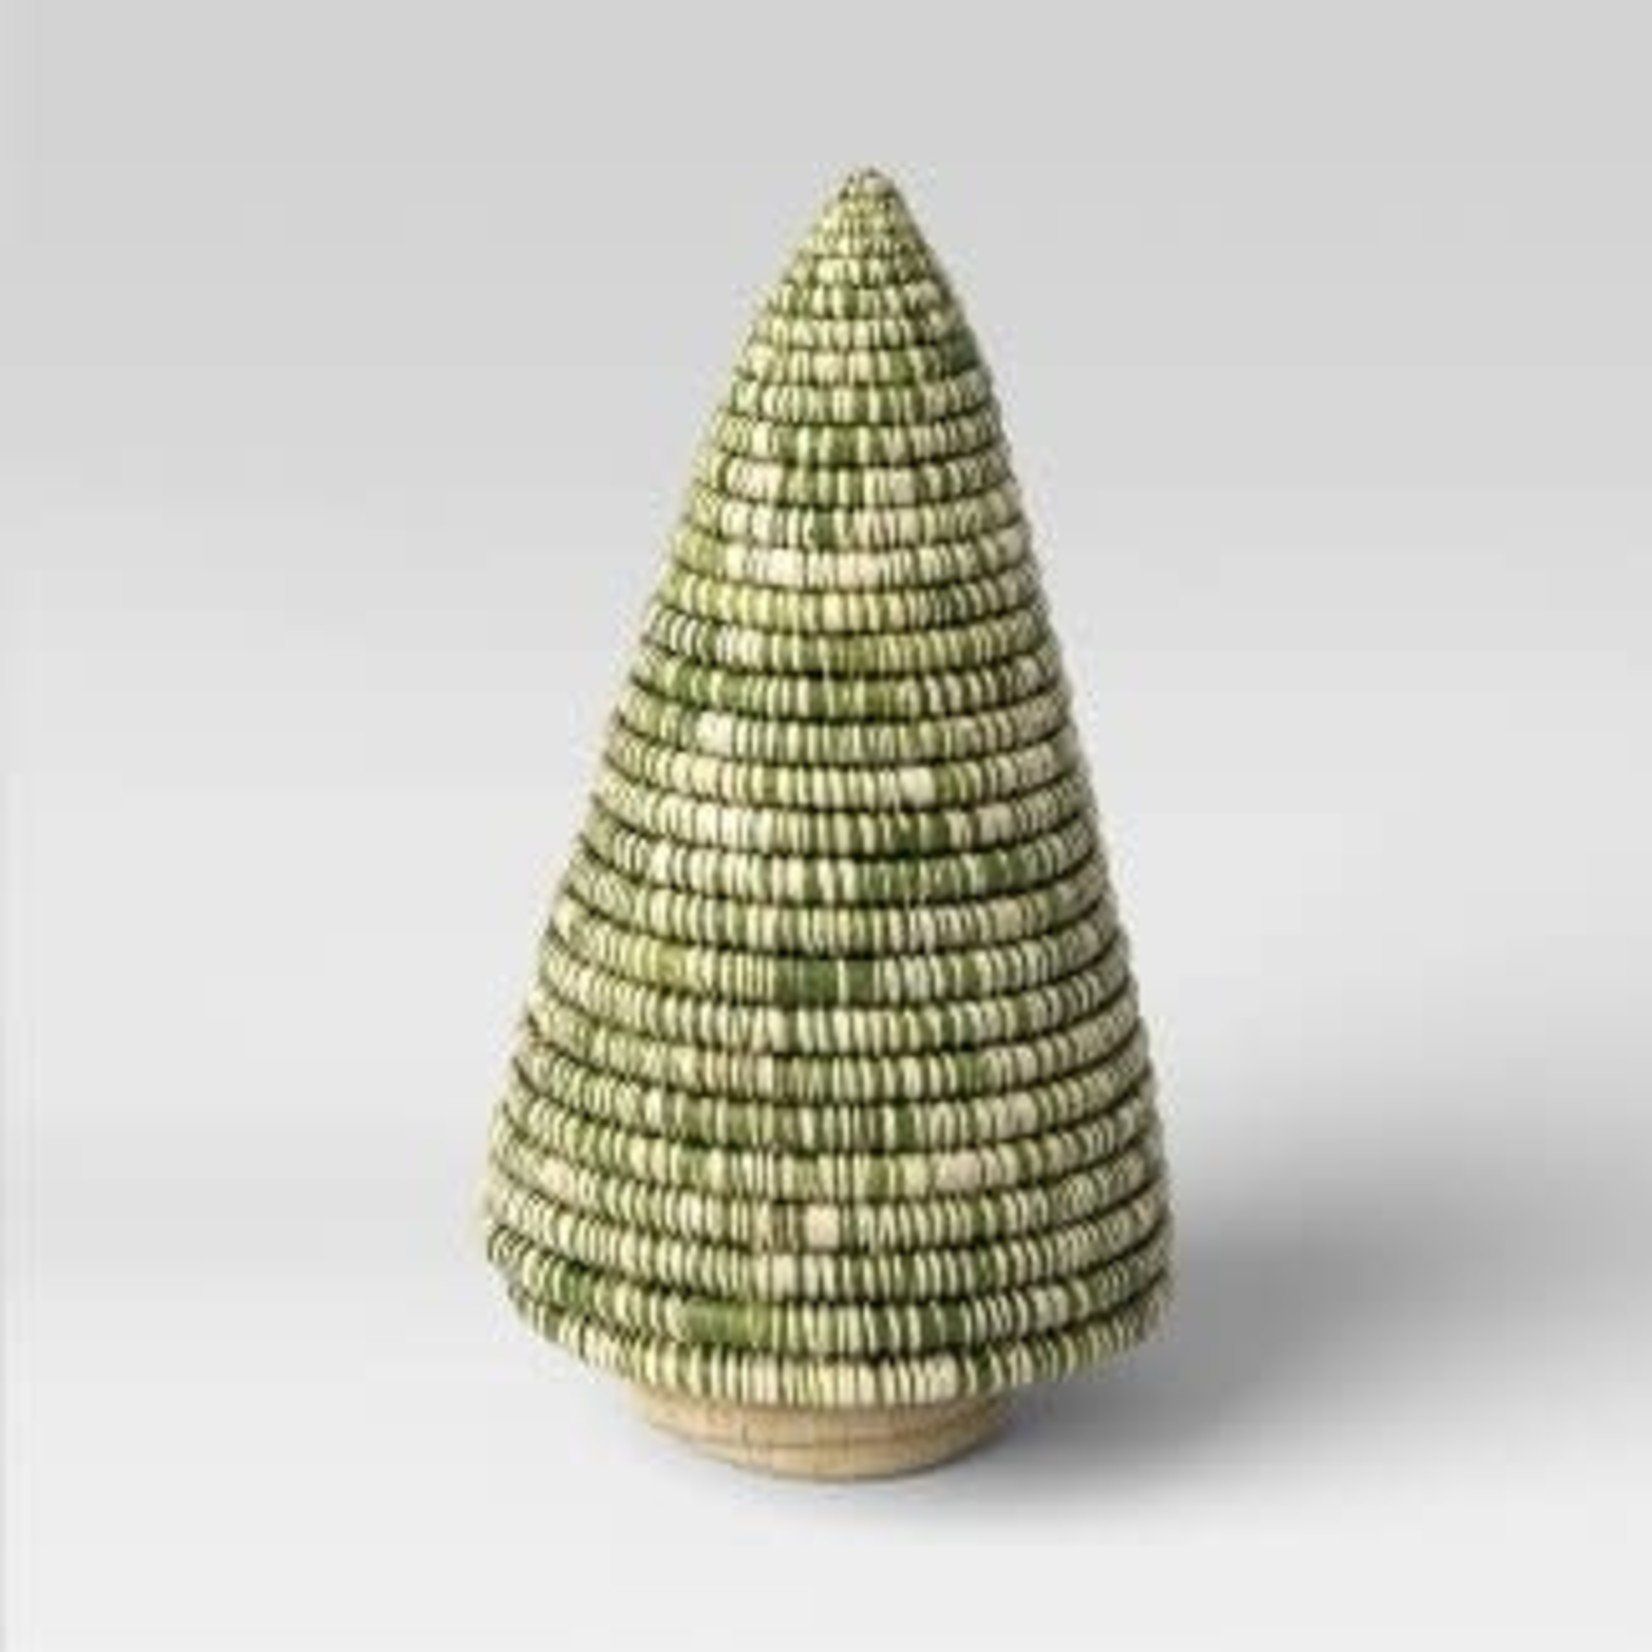 Large Woven Green Tree - Threshold 9 Inches (H) x 5 Inches (W) x 5 Inches (D)